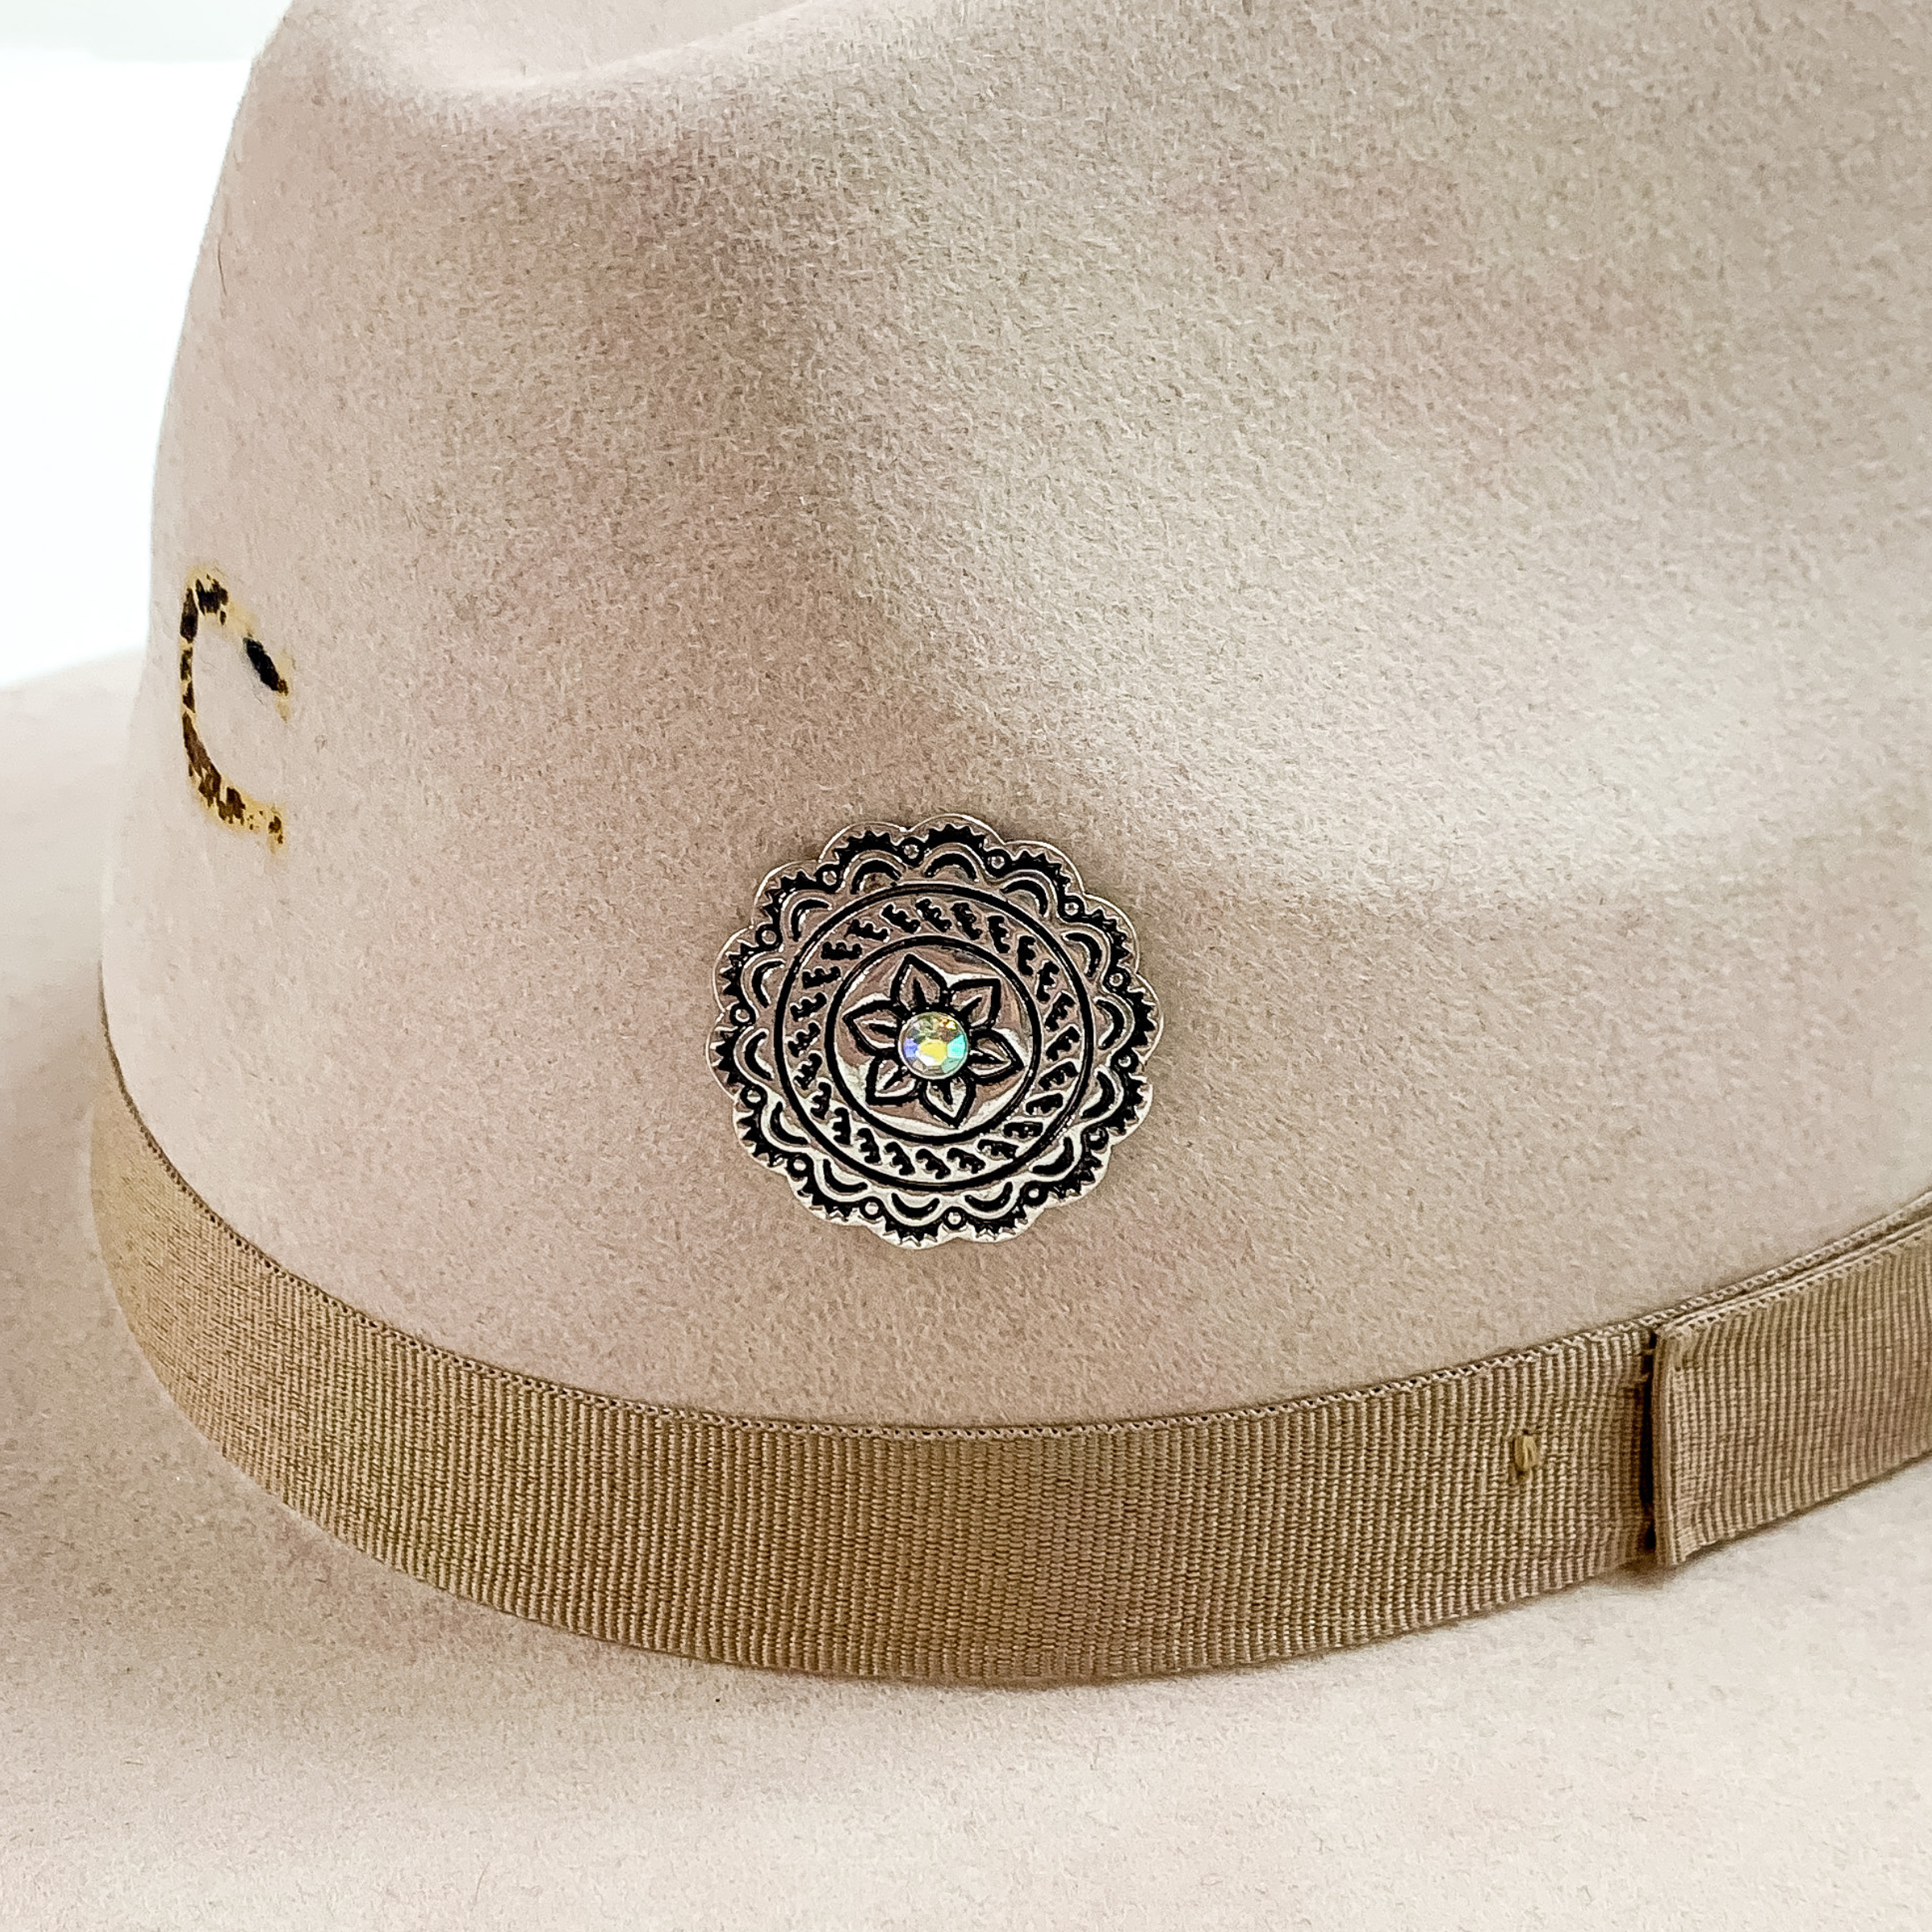 Circle concho hat pin in silver with a center ab crystal pictured on a beige colored hat pictured on a white background.